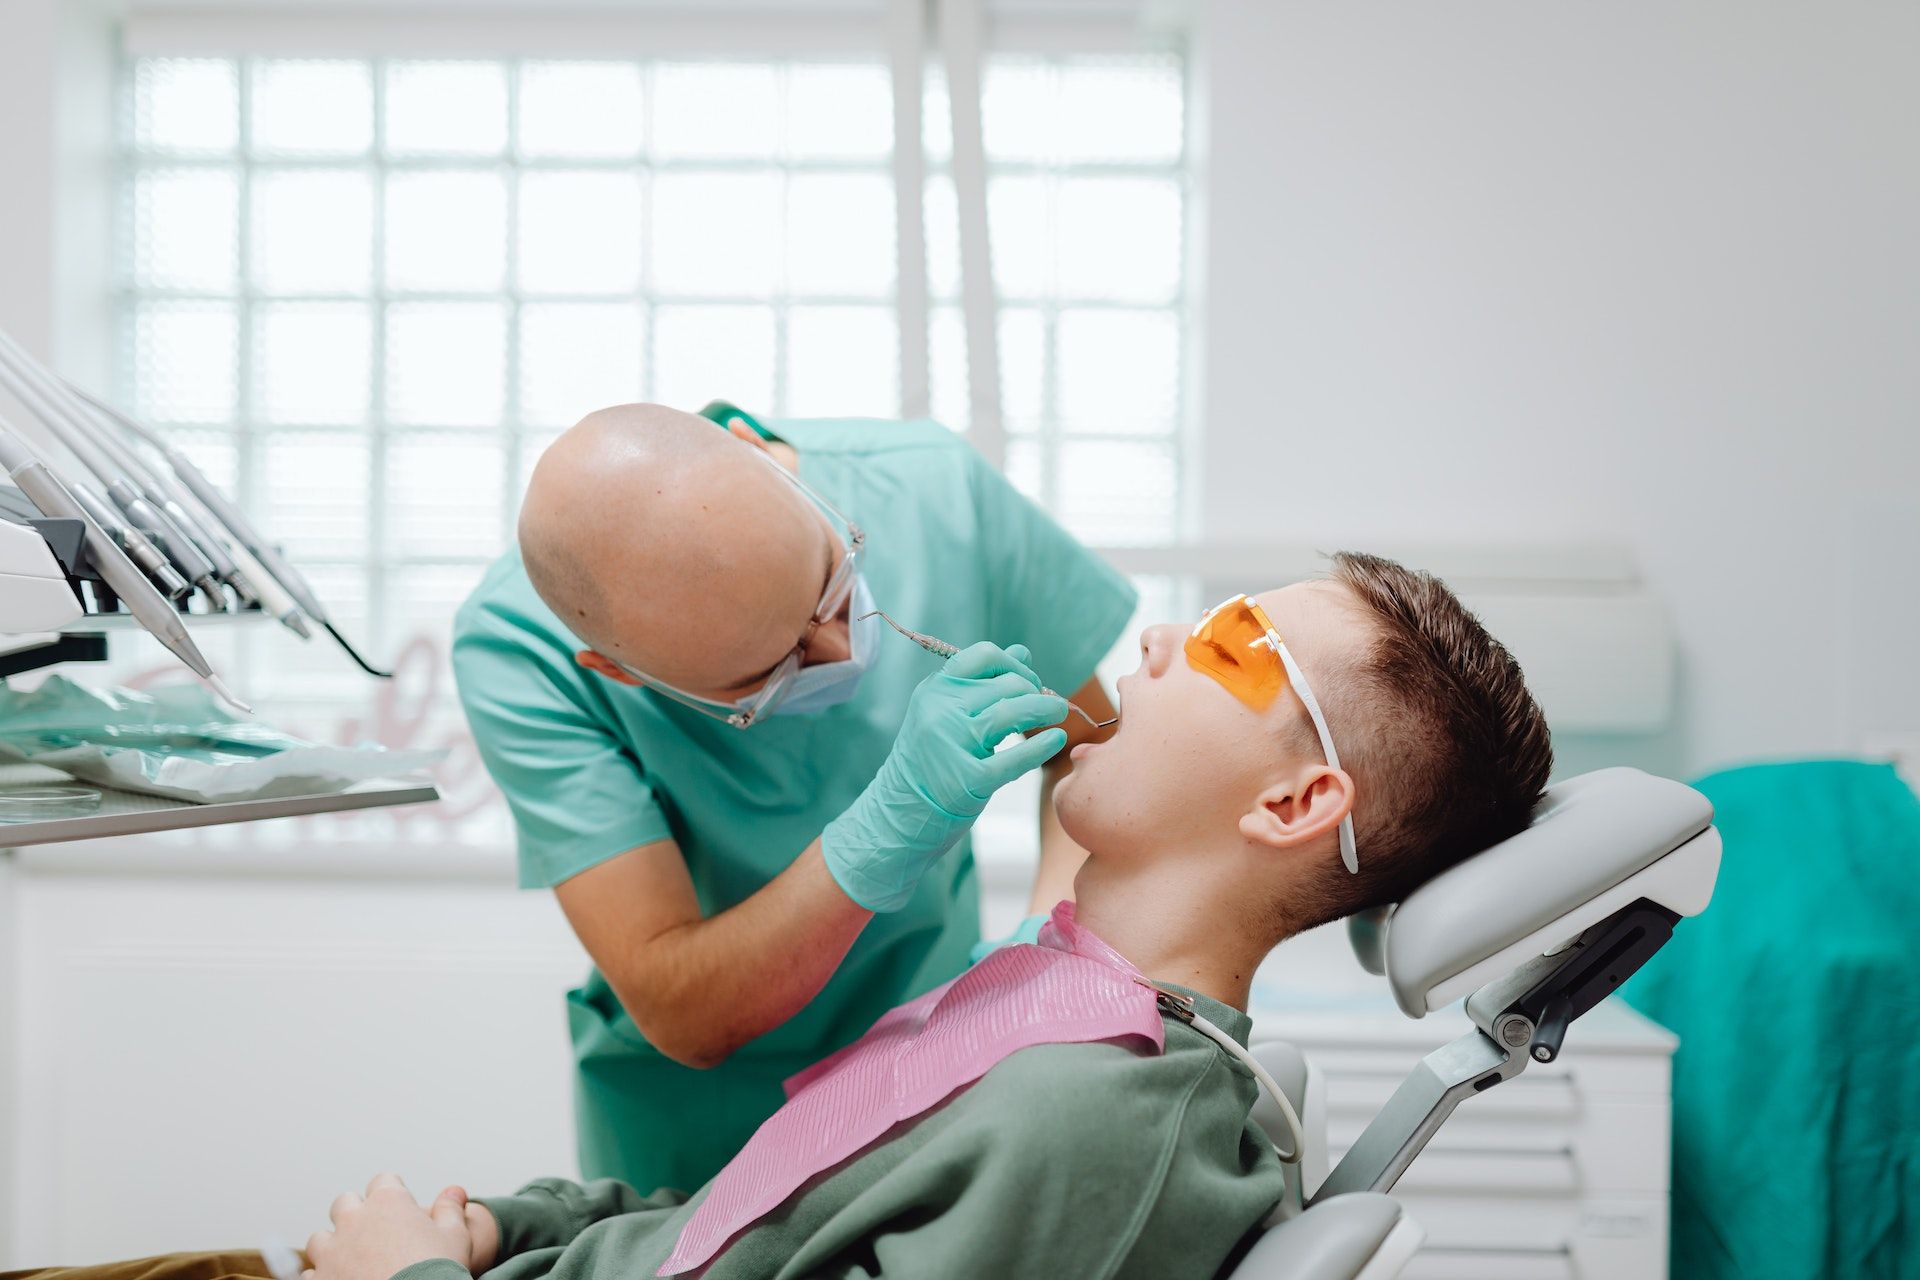 dentist cleaning young patient's mouth